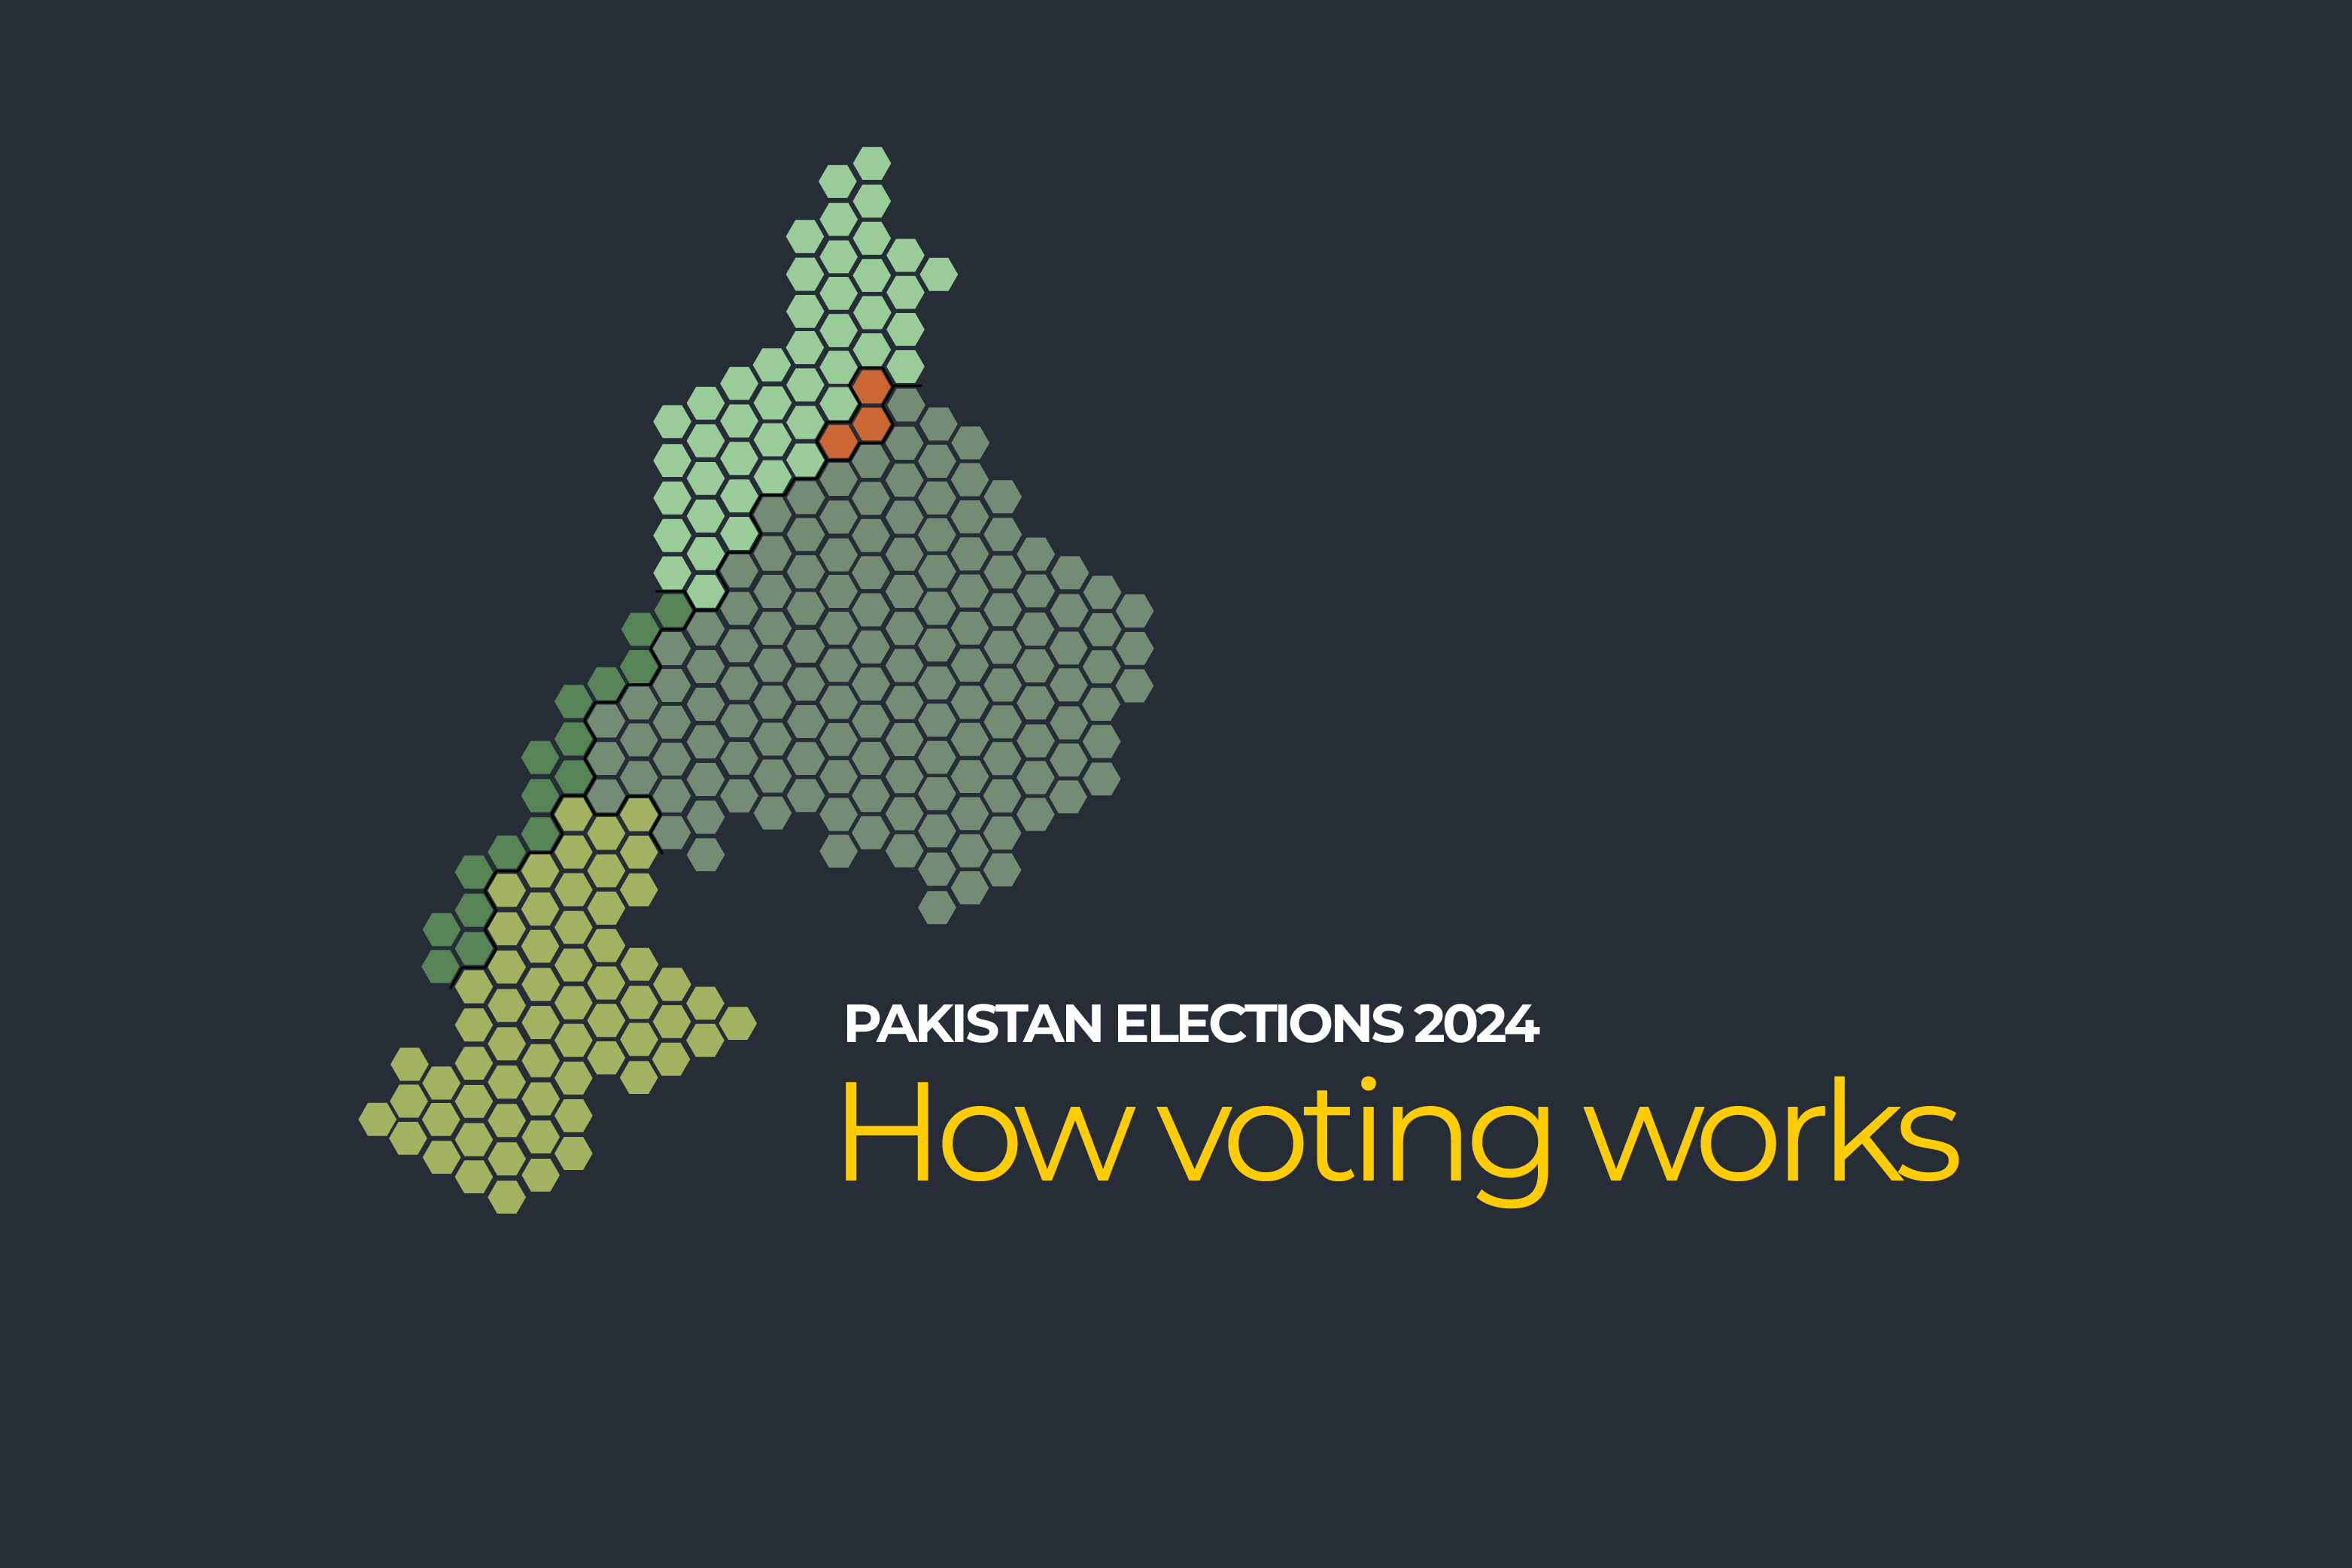 Pakistan elections 2024 How the voting works